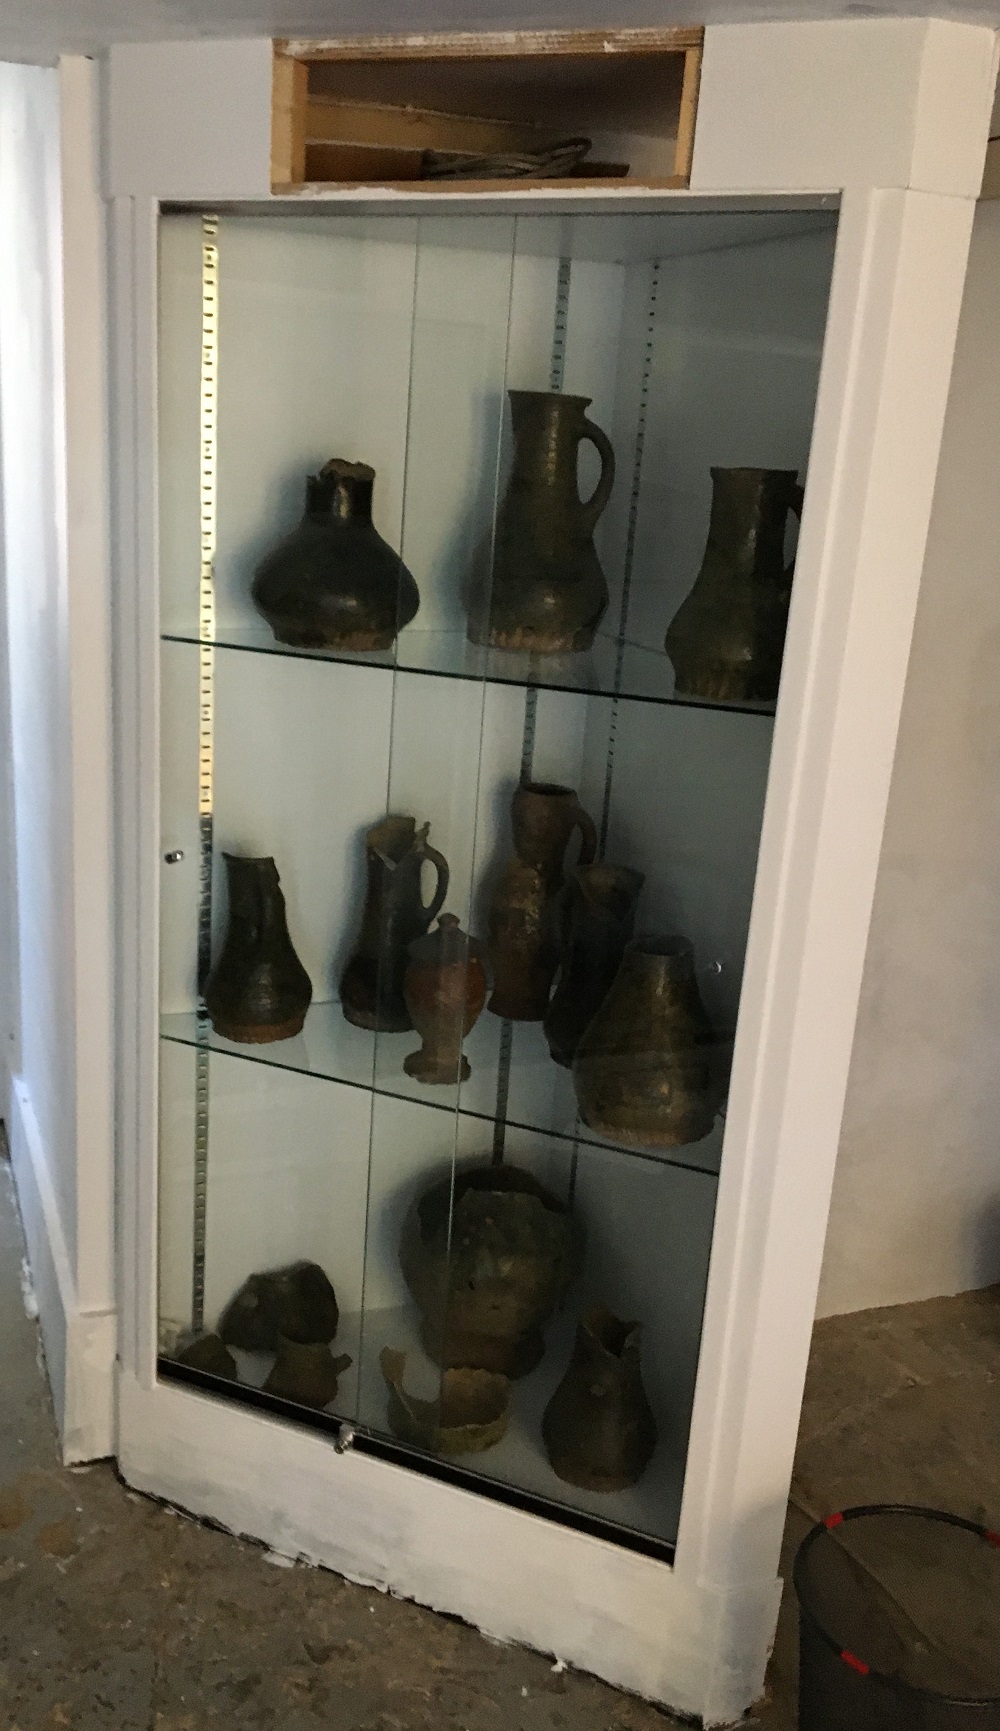 A cabinet of medieval pottery from the Horsham Hoard collection